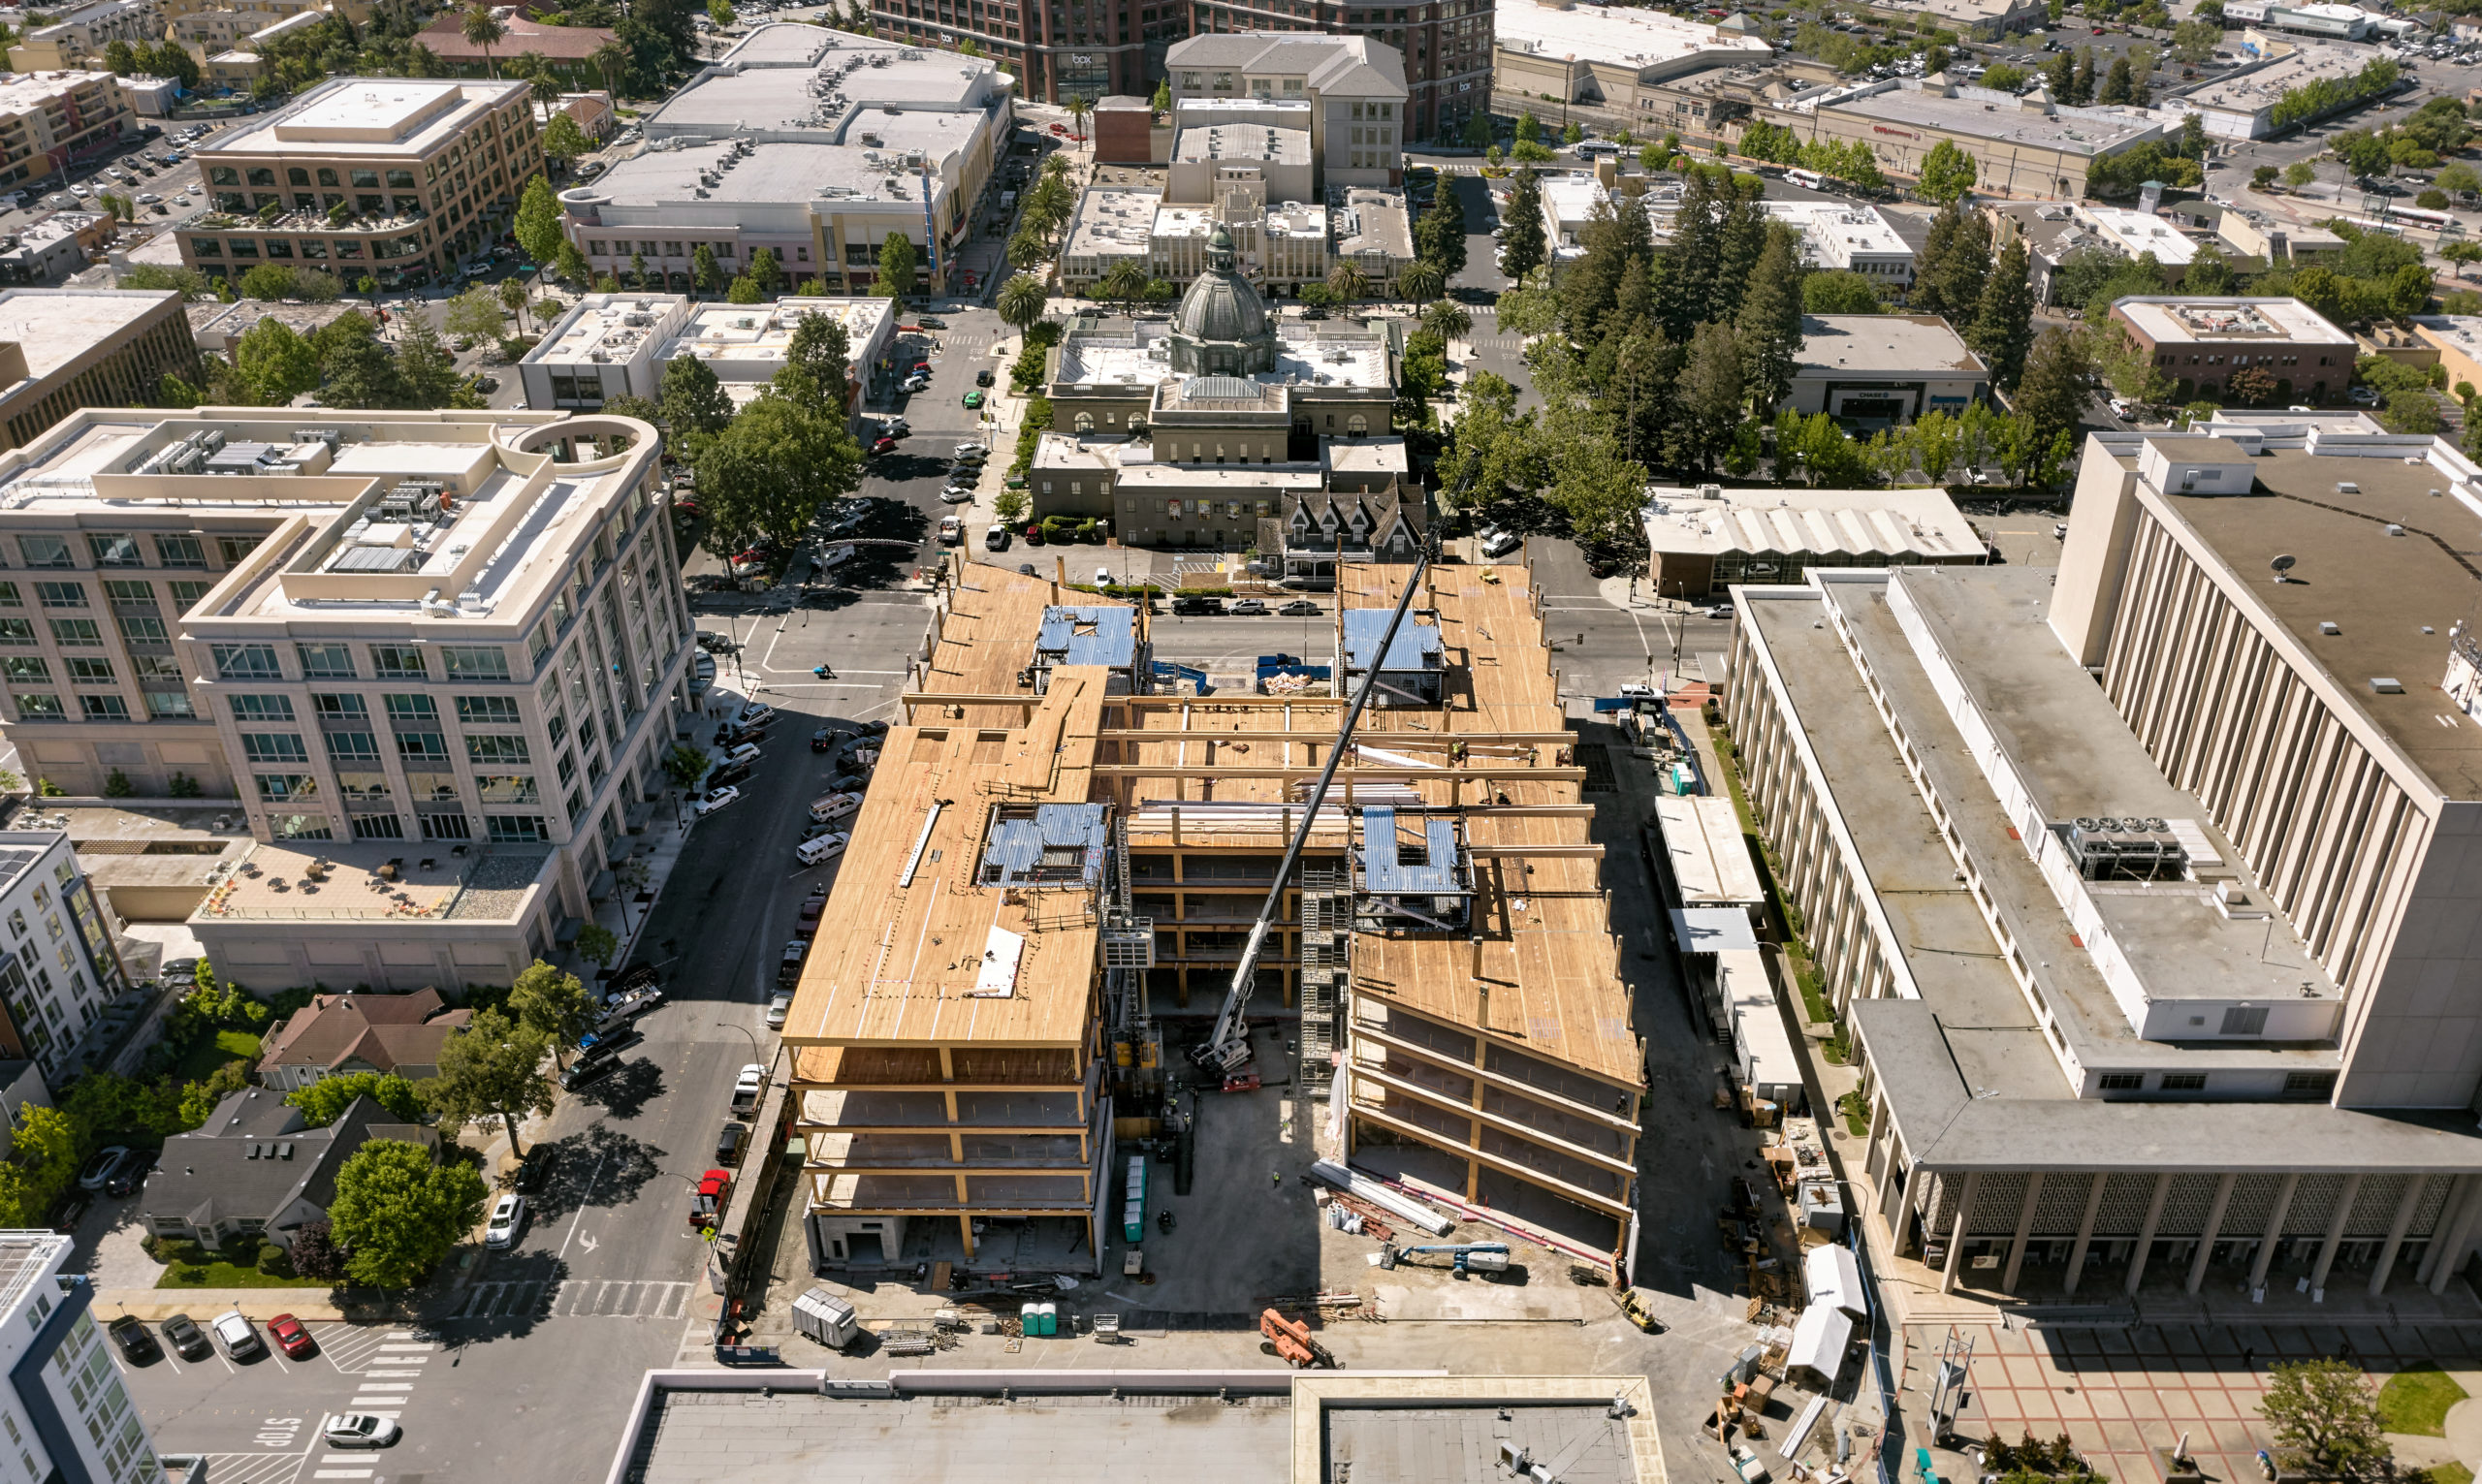 San Mateo County Office Building Three aerial perspective, image by Cesar Rubio